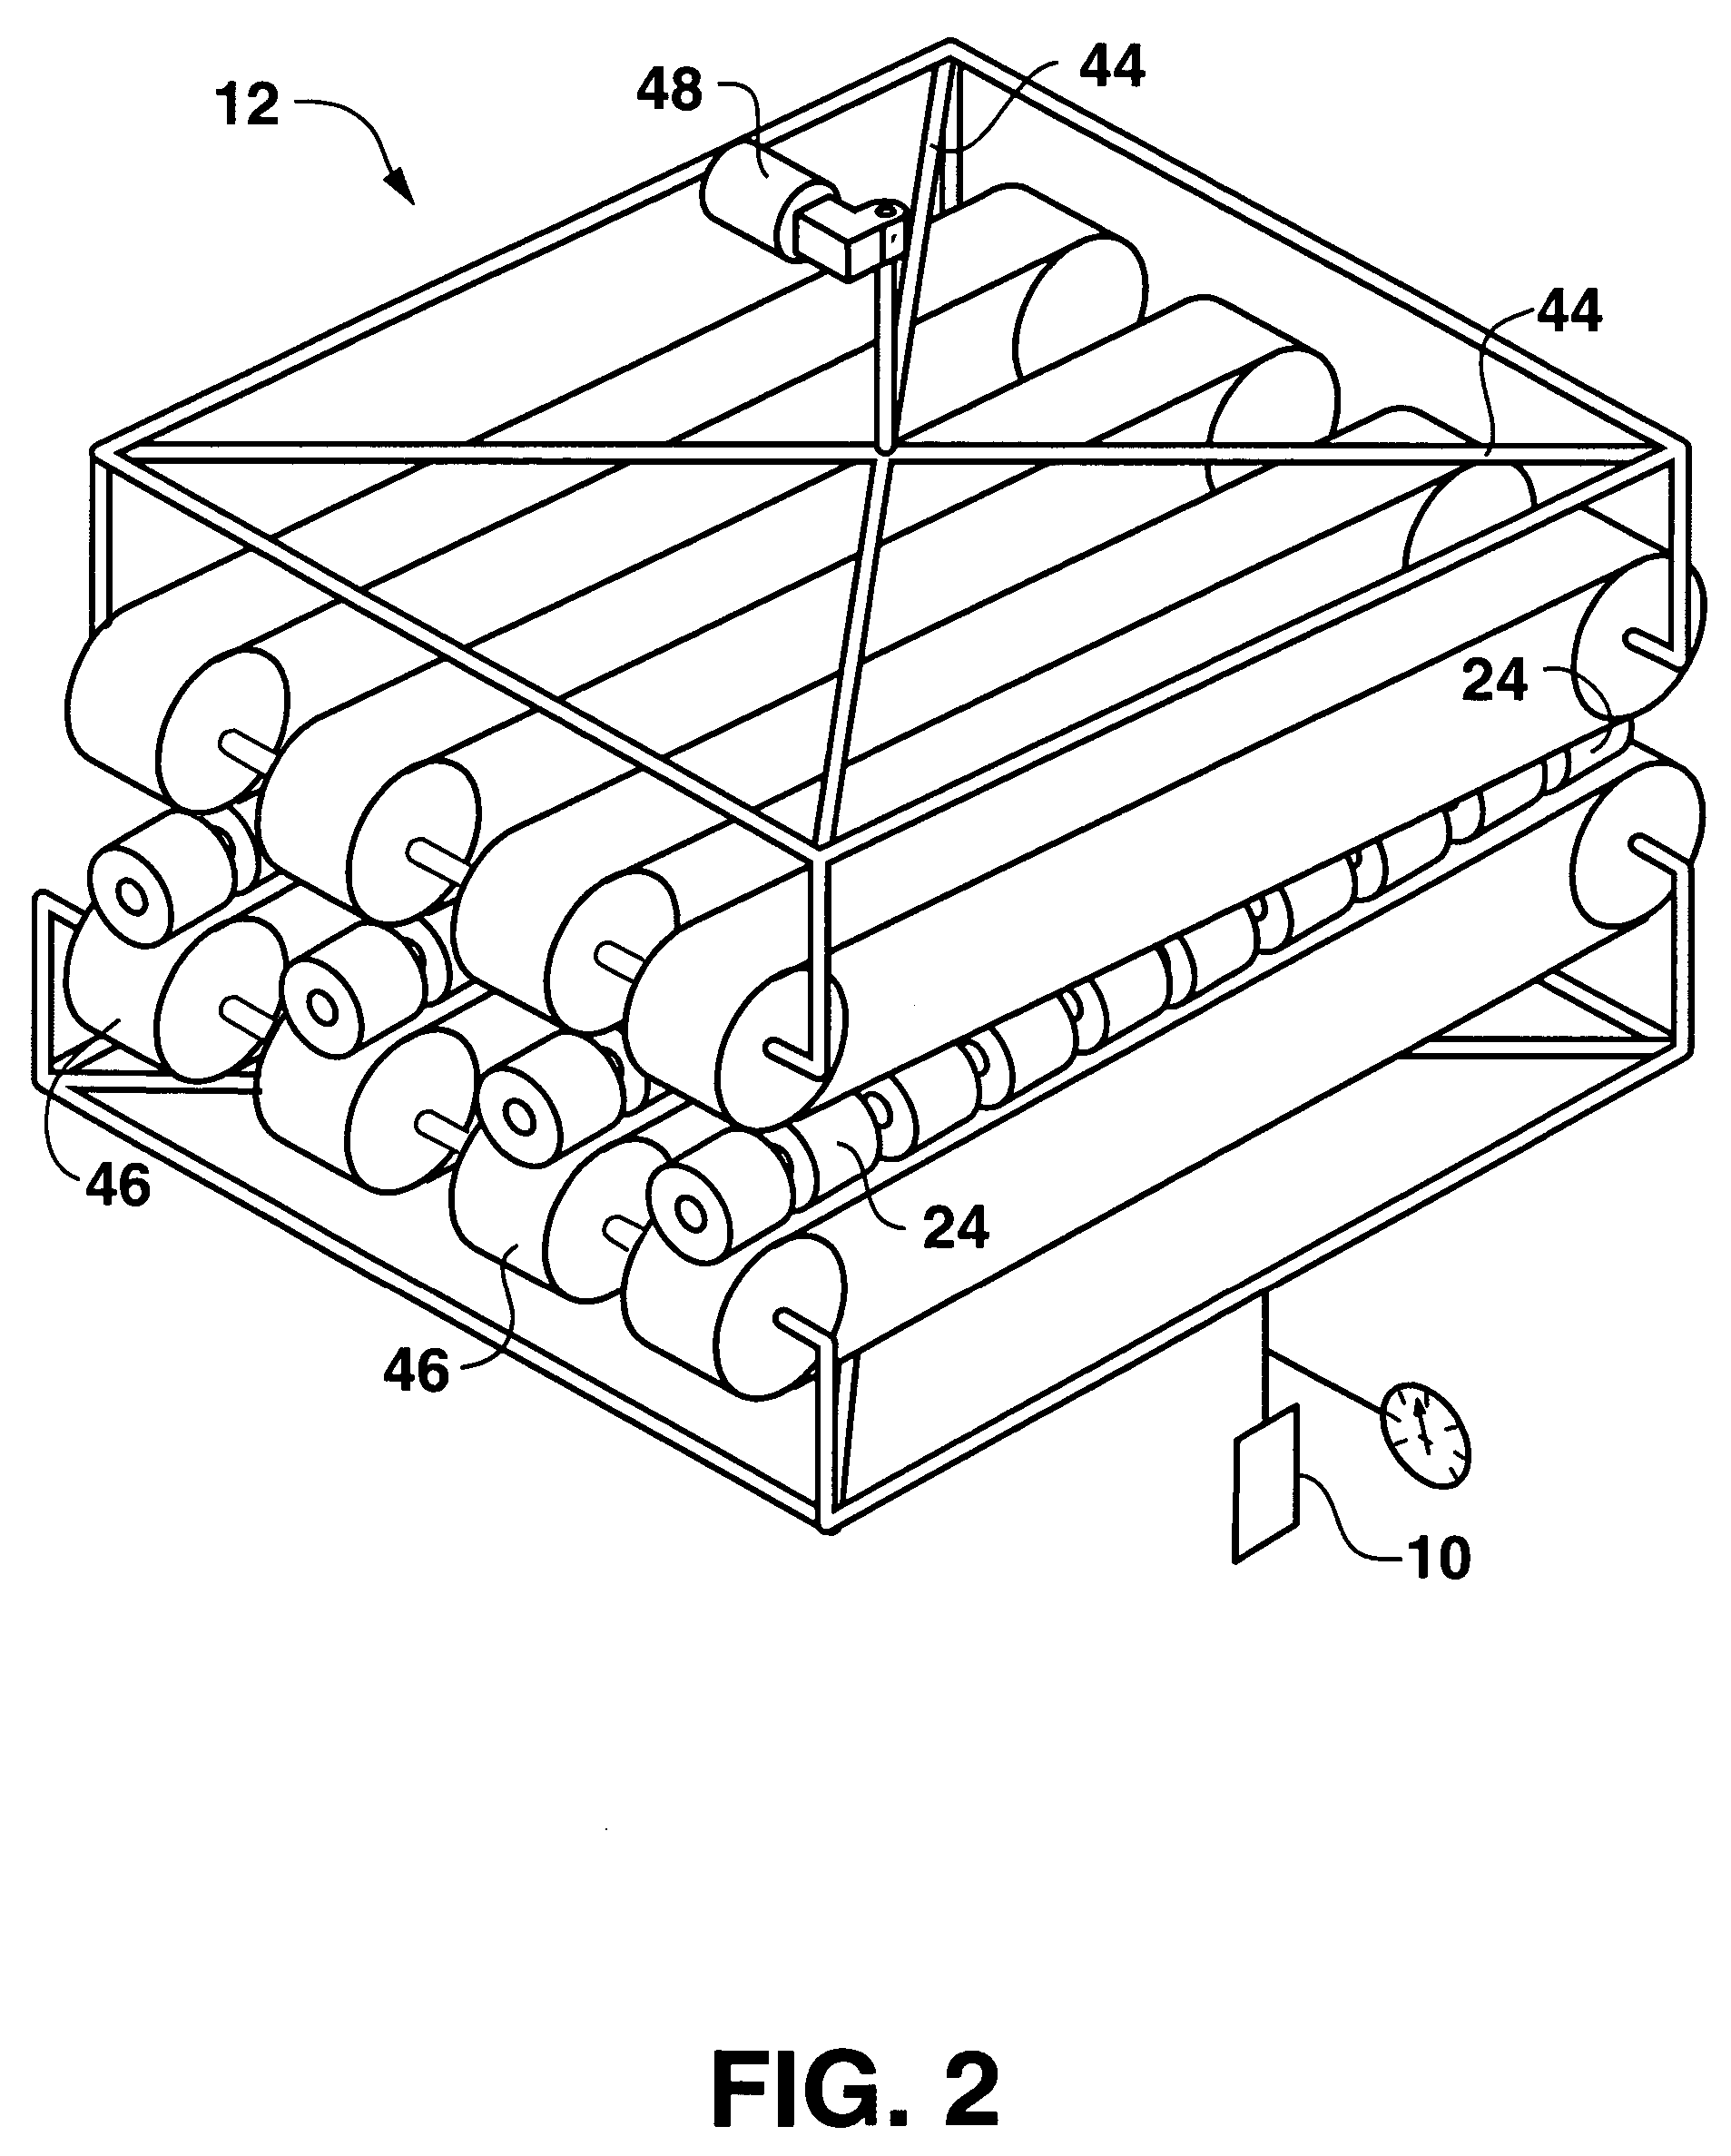 Variable position constant force packaging system and process for using same